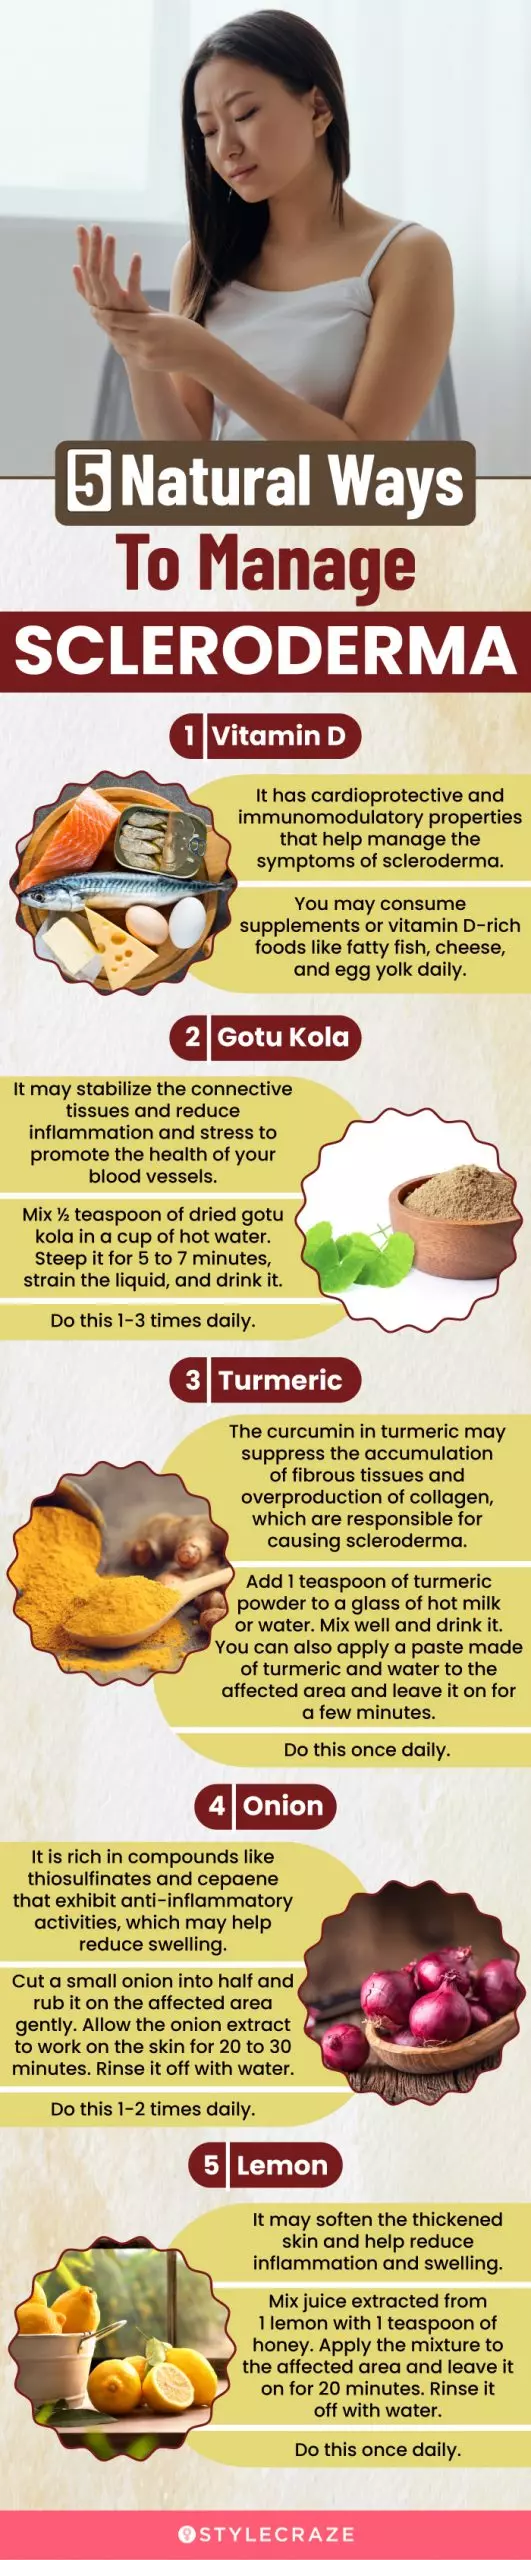 5 natural ways to manage scleroderma (infographic)